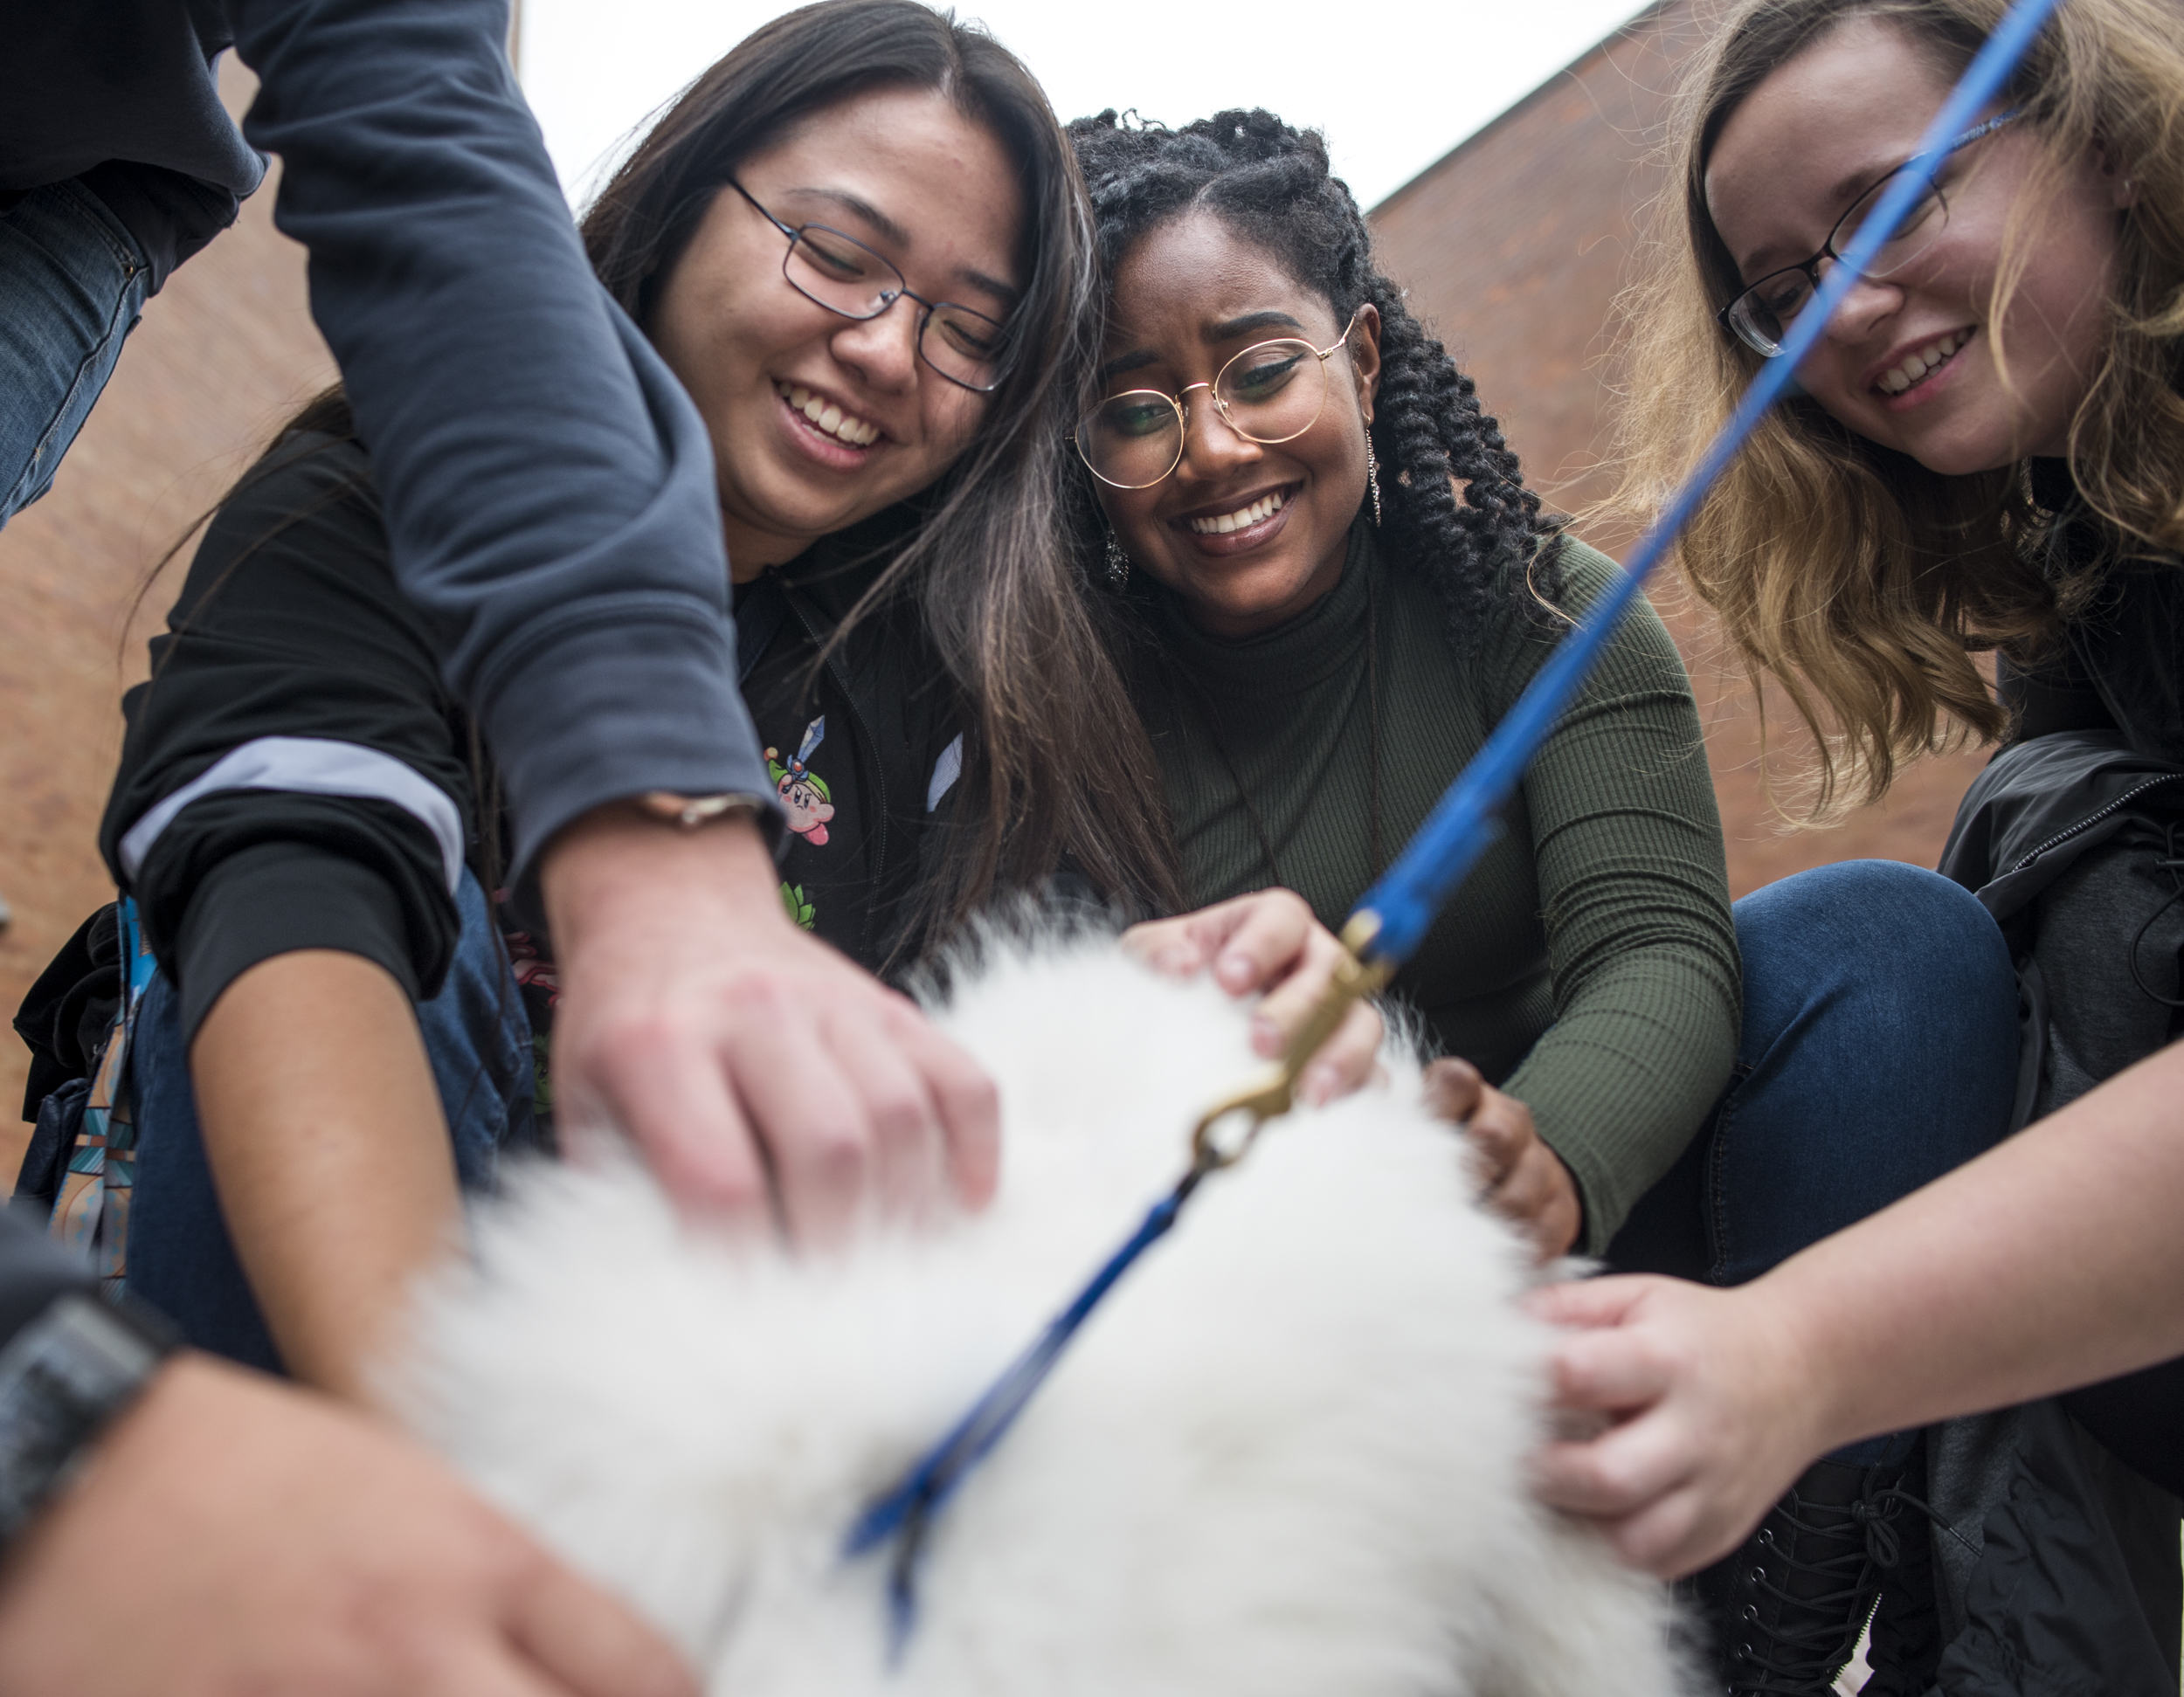 RIT's Bow Wow Wellness program brings therapy dogs to campus for students.